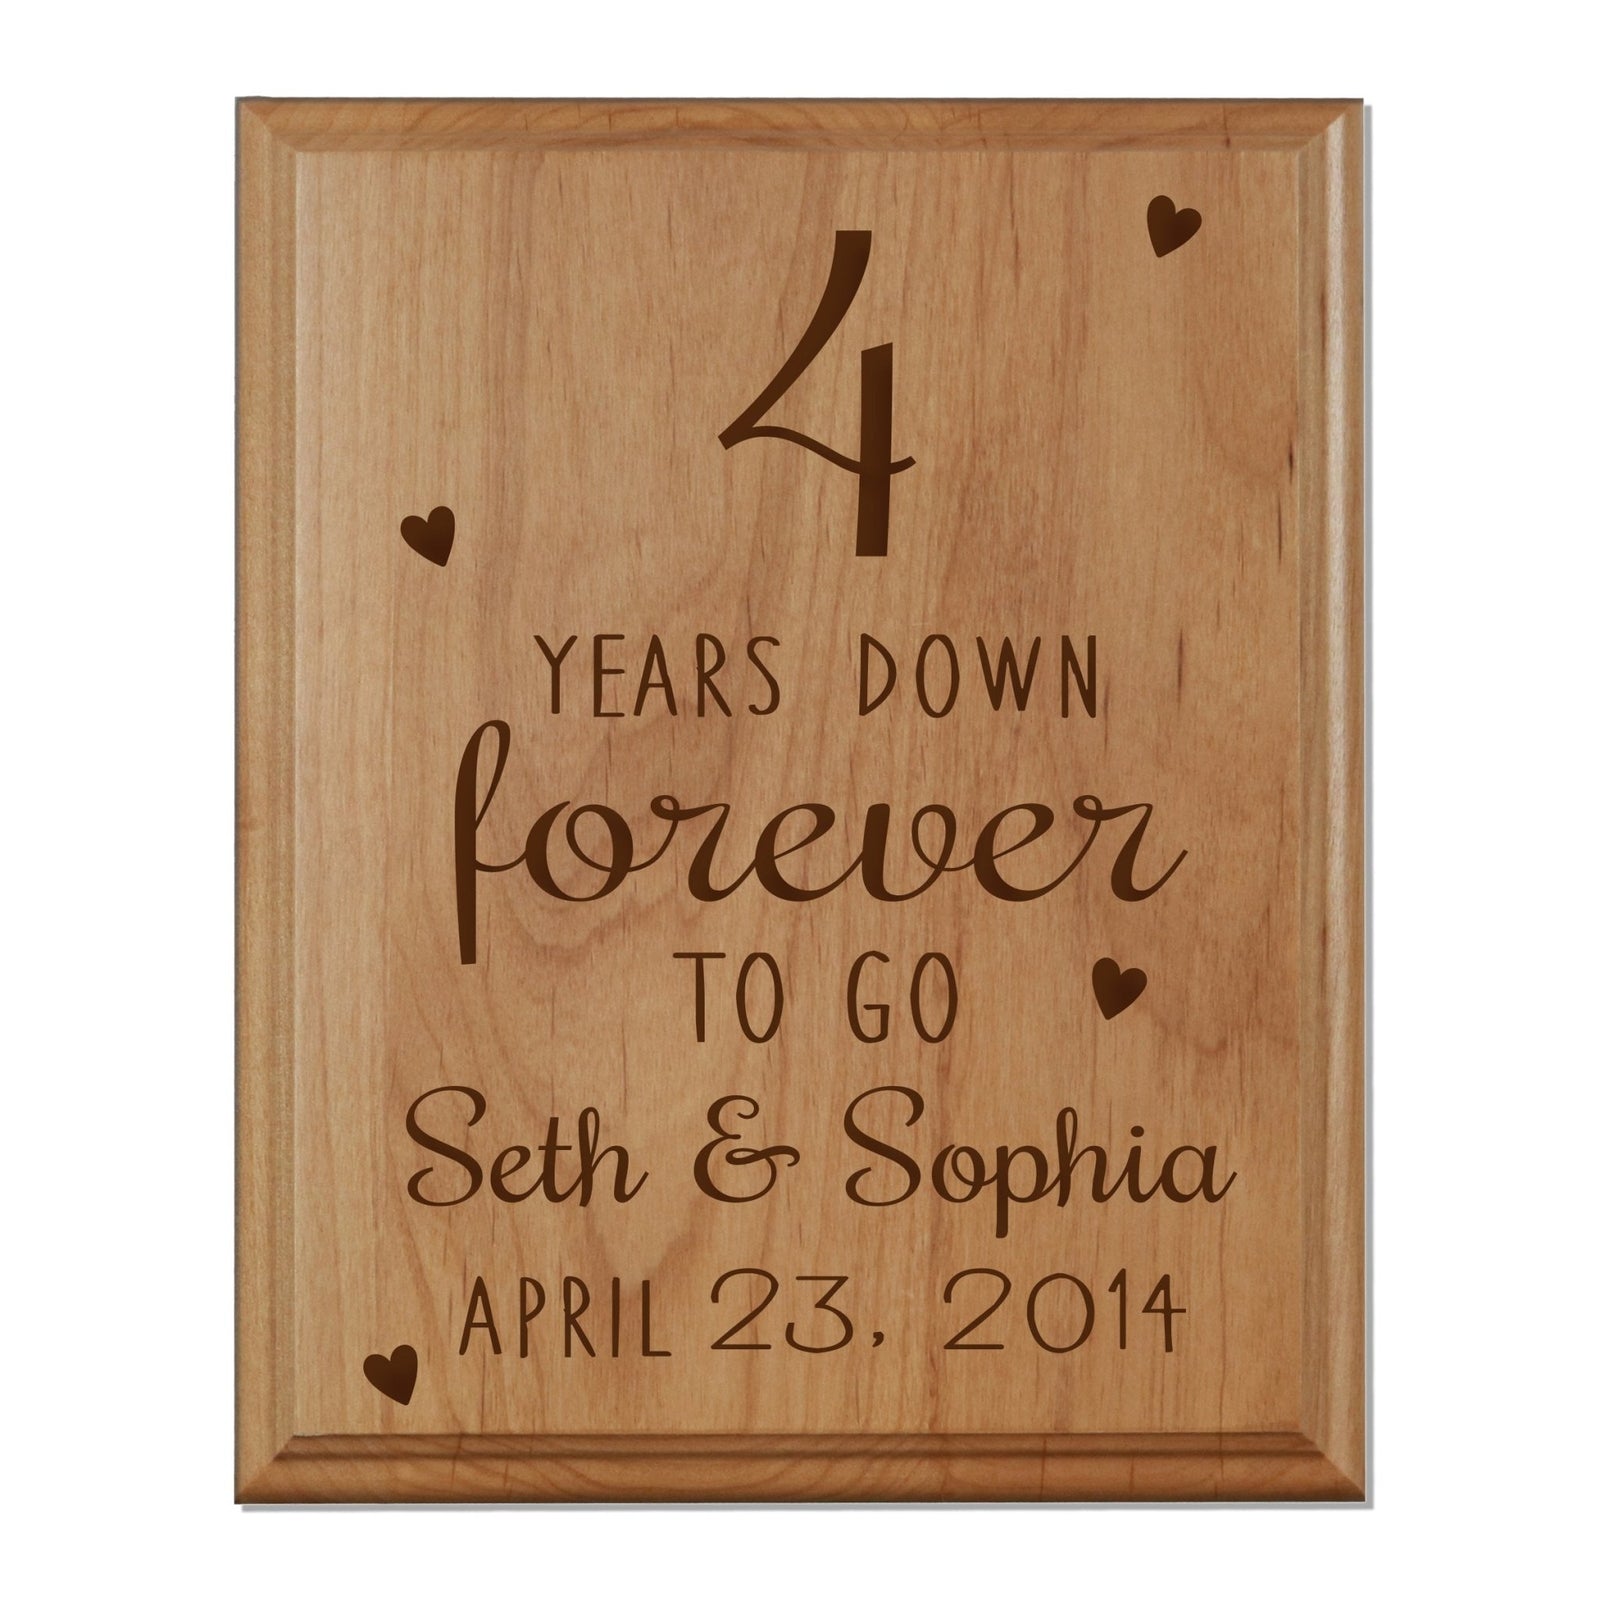 Personalized 8x10 Anniversary Plaques - 4 Year Down - LifeSong Milestones